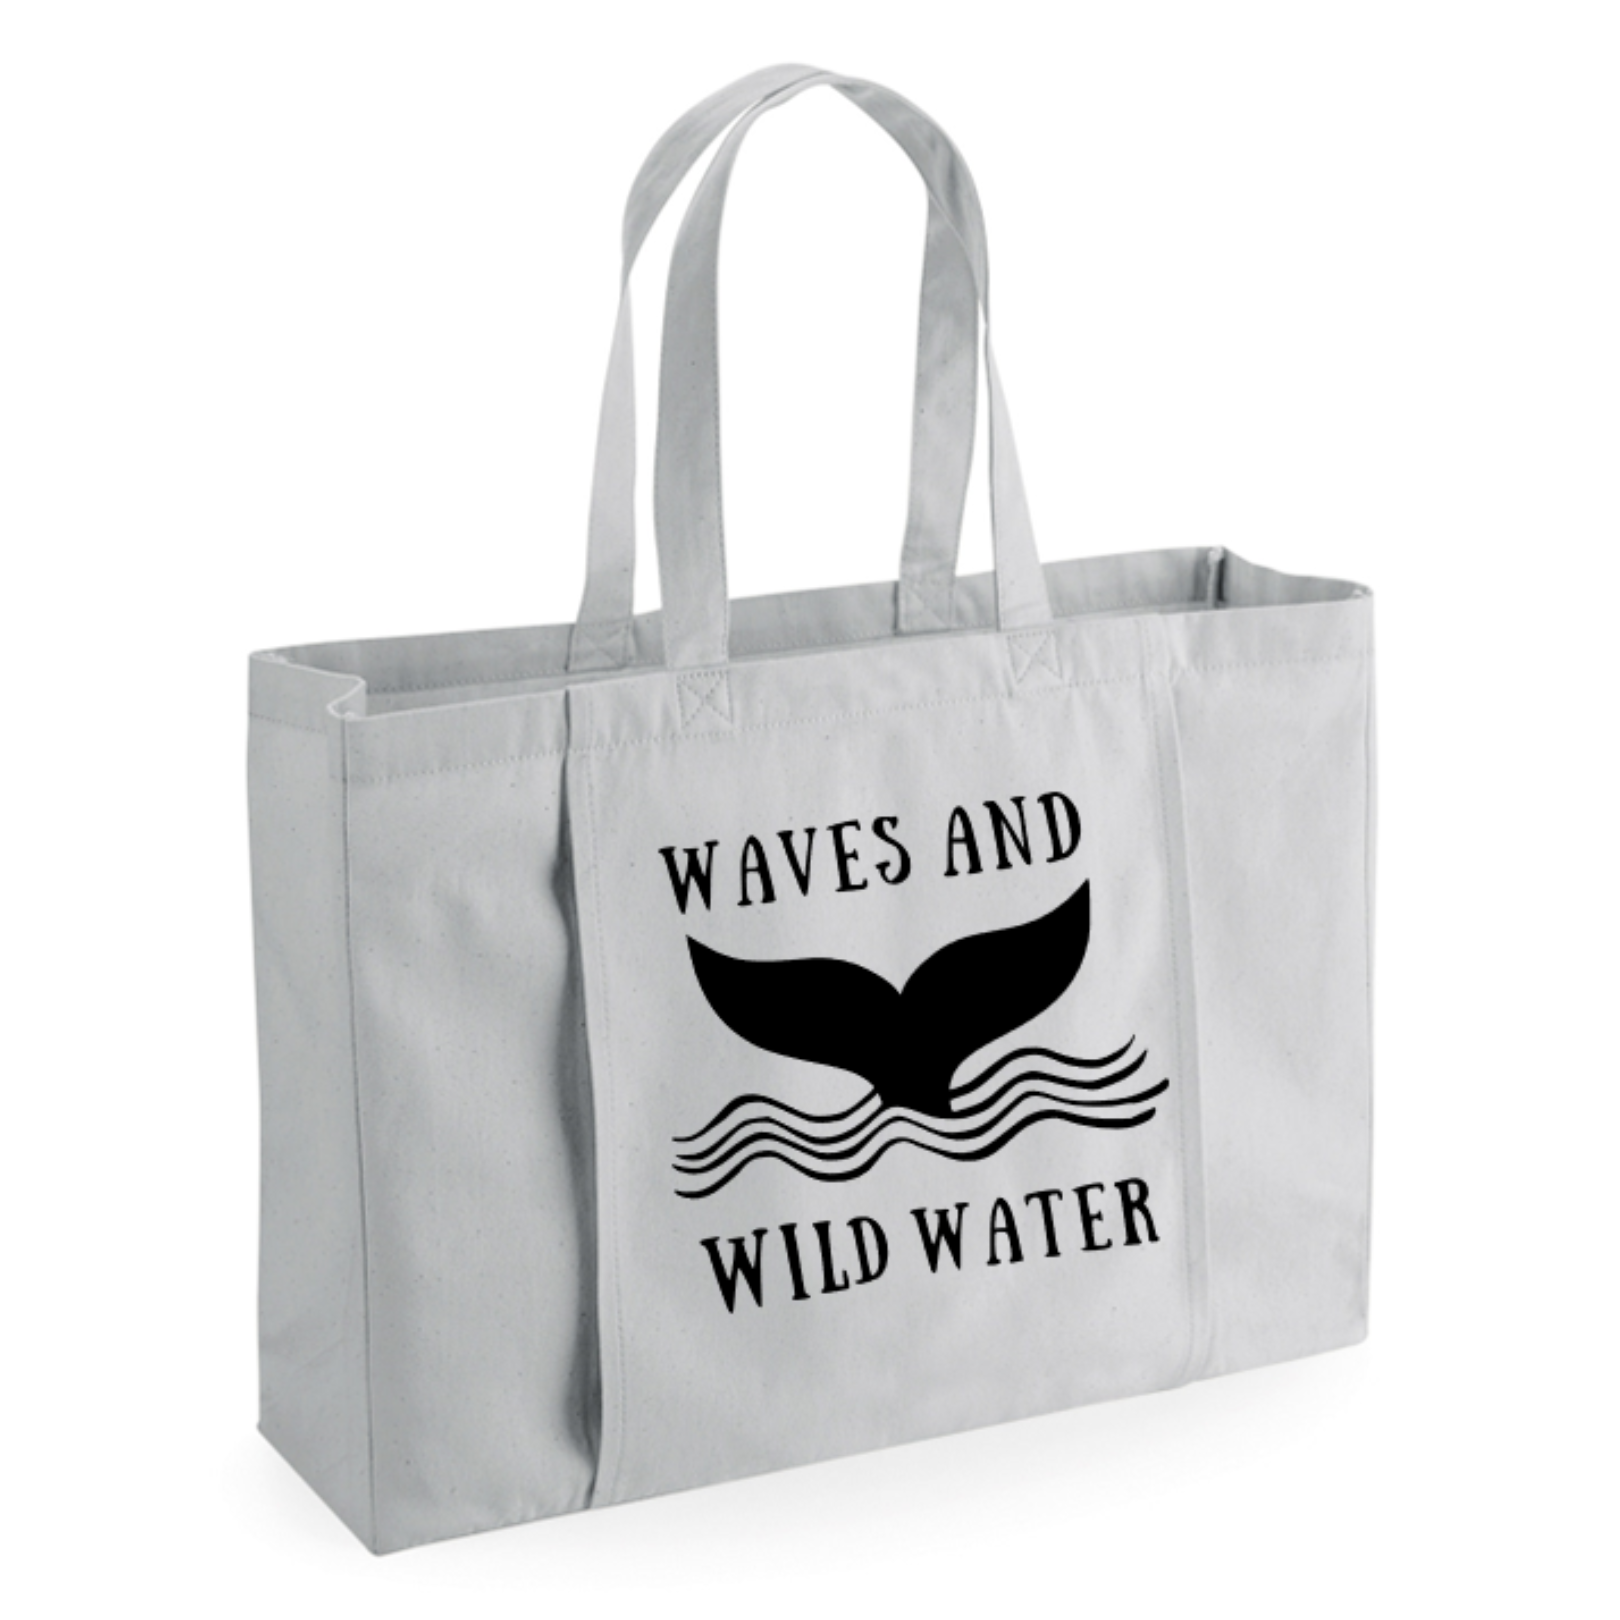 A grey tote bag, with Waves & Wild Water logo on the front in black.